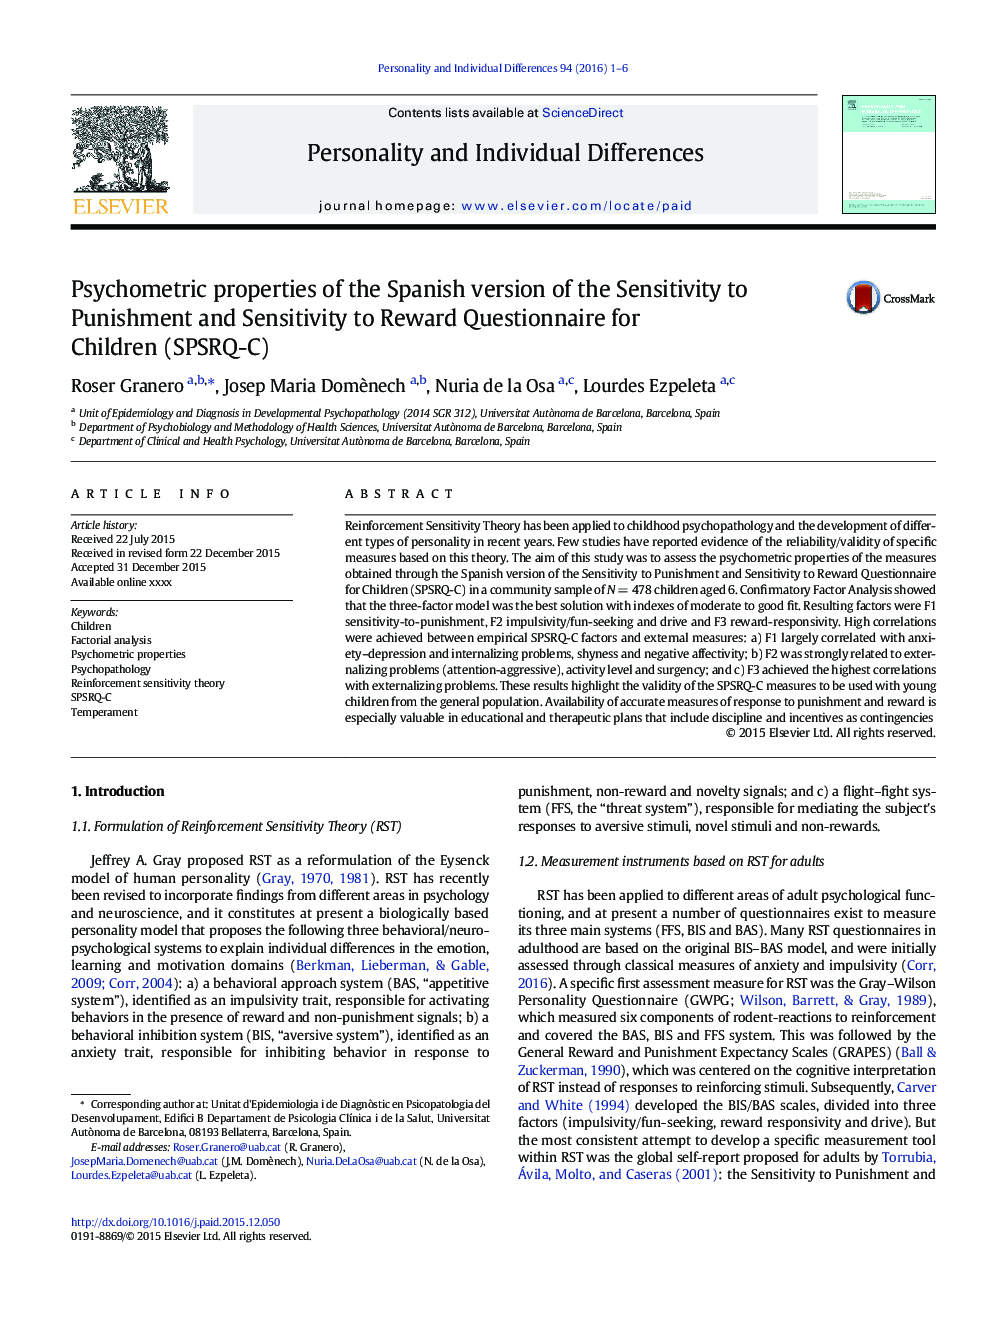 Psychometric properties of the Spanish version of the Sensitivity to Punishment and Sensitivity to Reward Questionnaire for Children (SPSRQ-C)